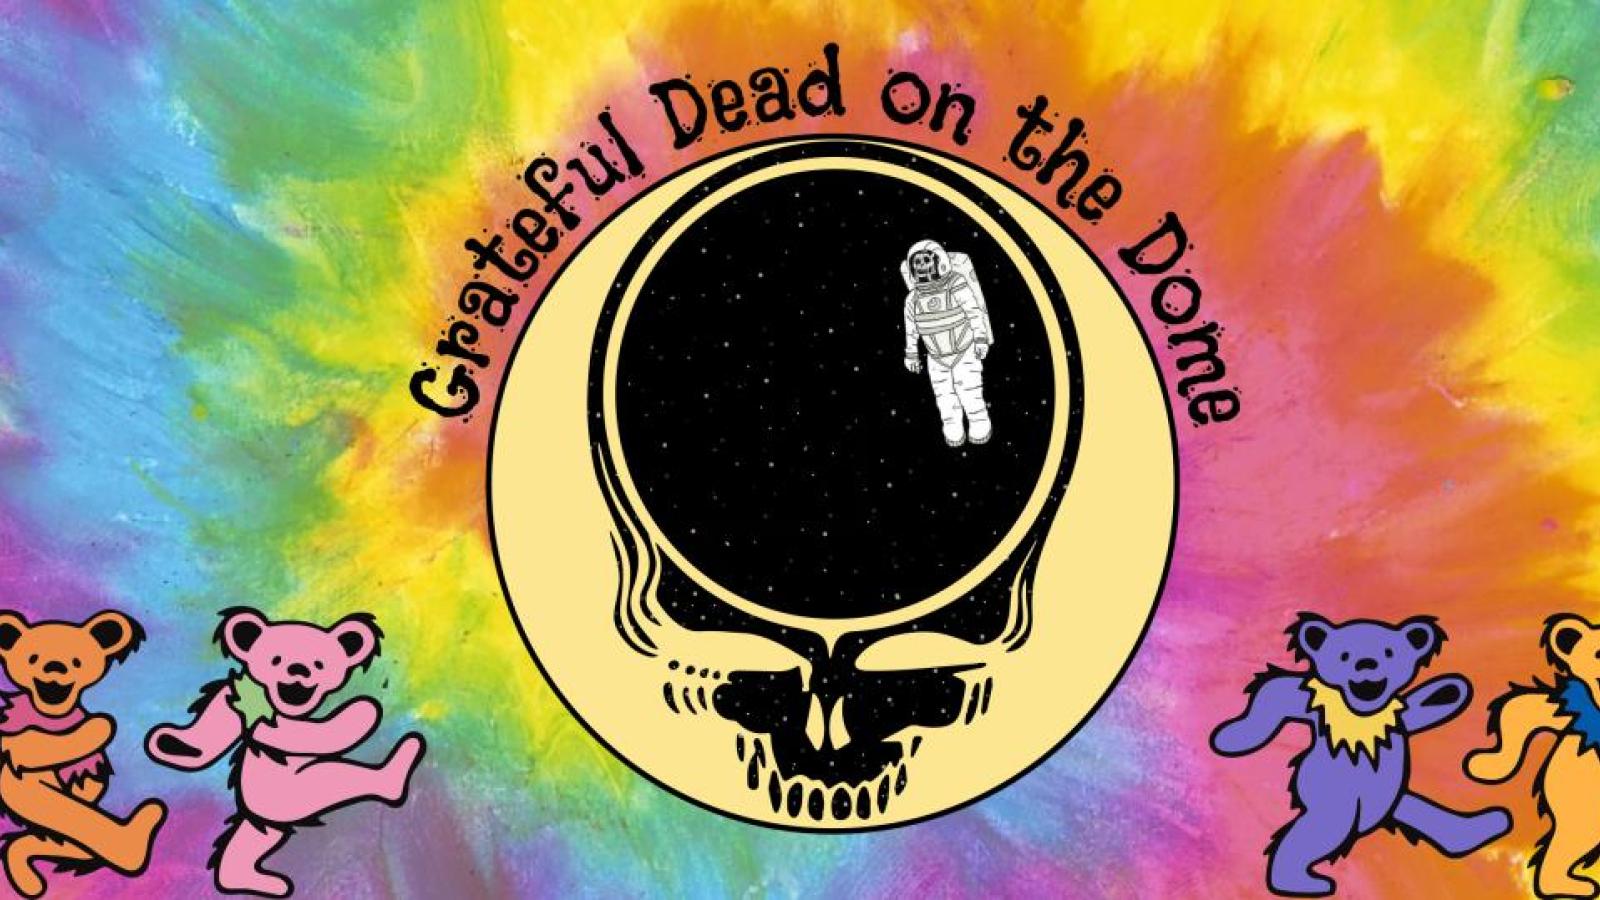 Pastel color tie-dye with dancing bears and Grateful Dead logo with astronaut